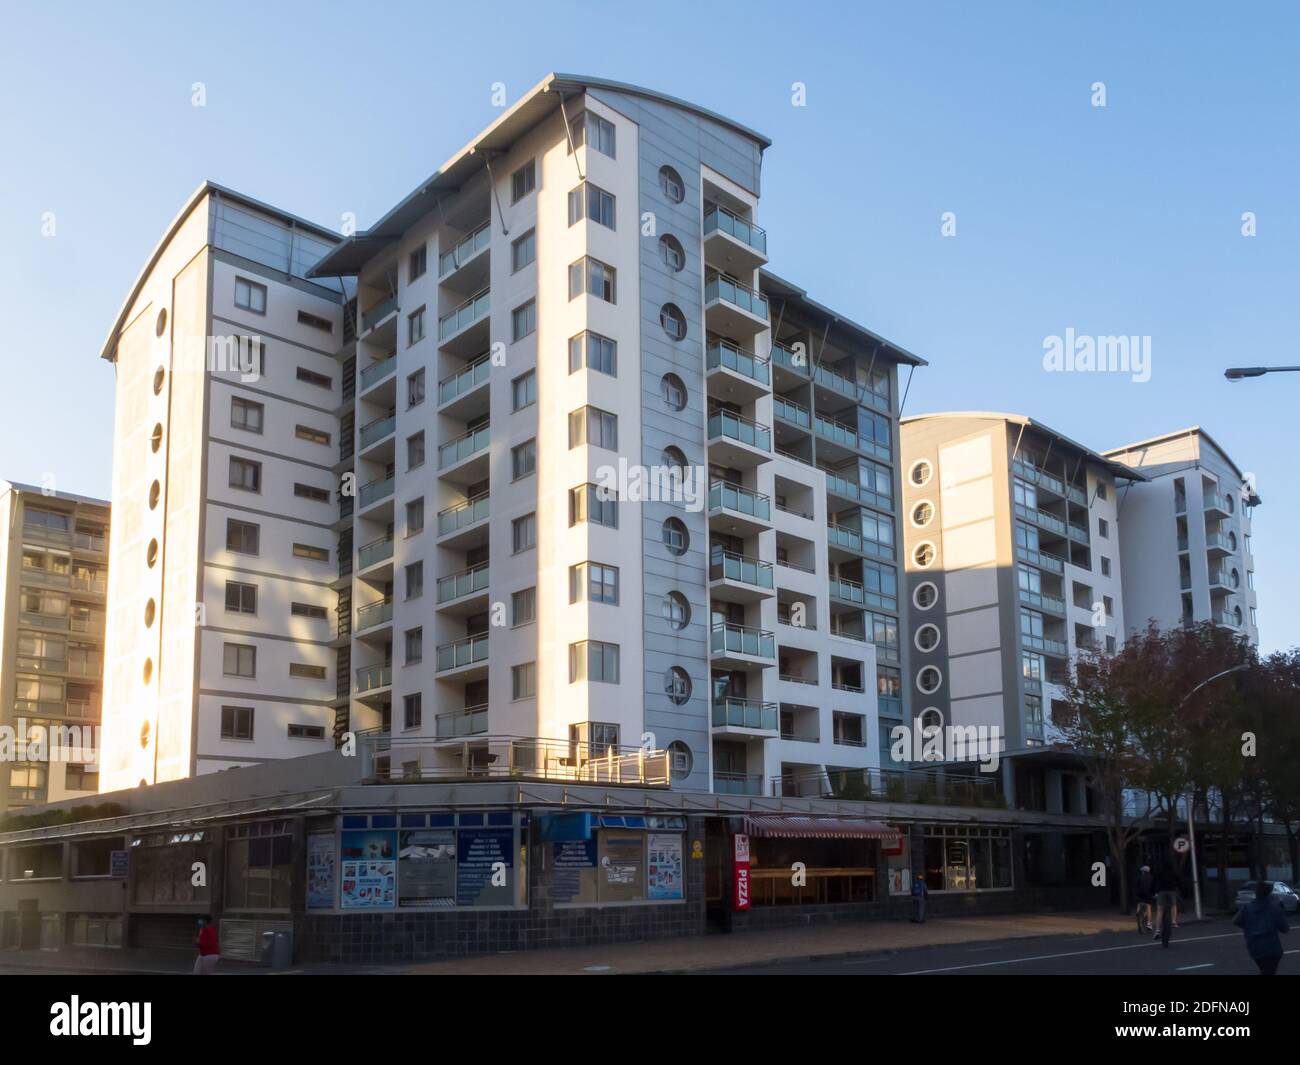 apartment block in modern or contemporary style architecture situated above shops in an urban suburb of Cape Town, South Africa Stock Photo